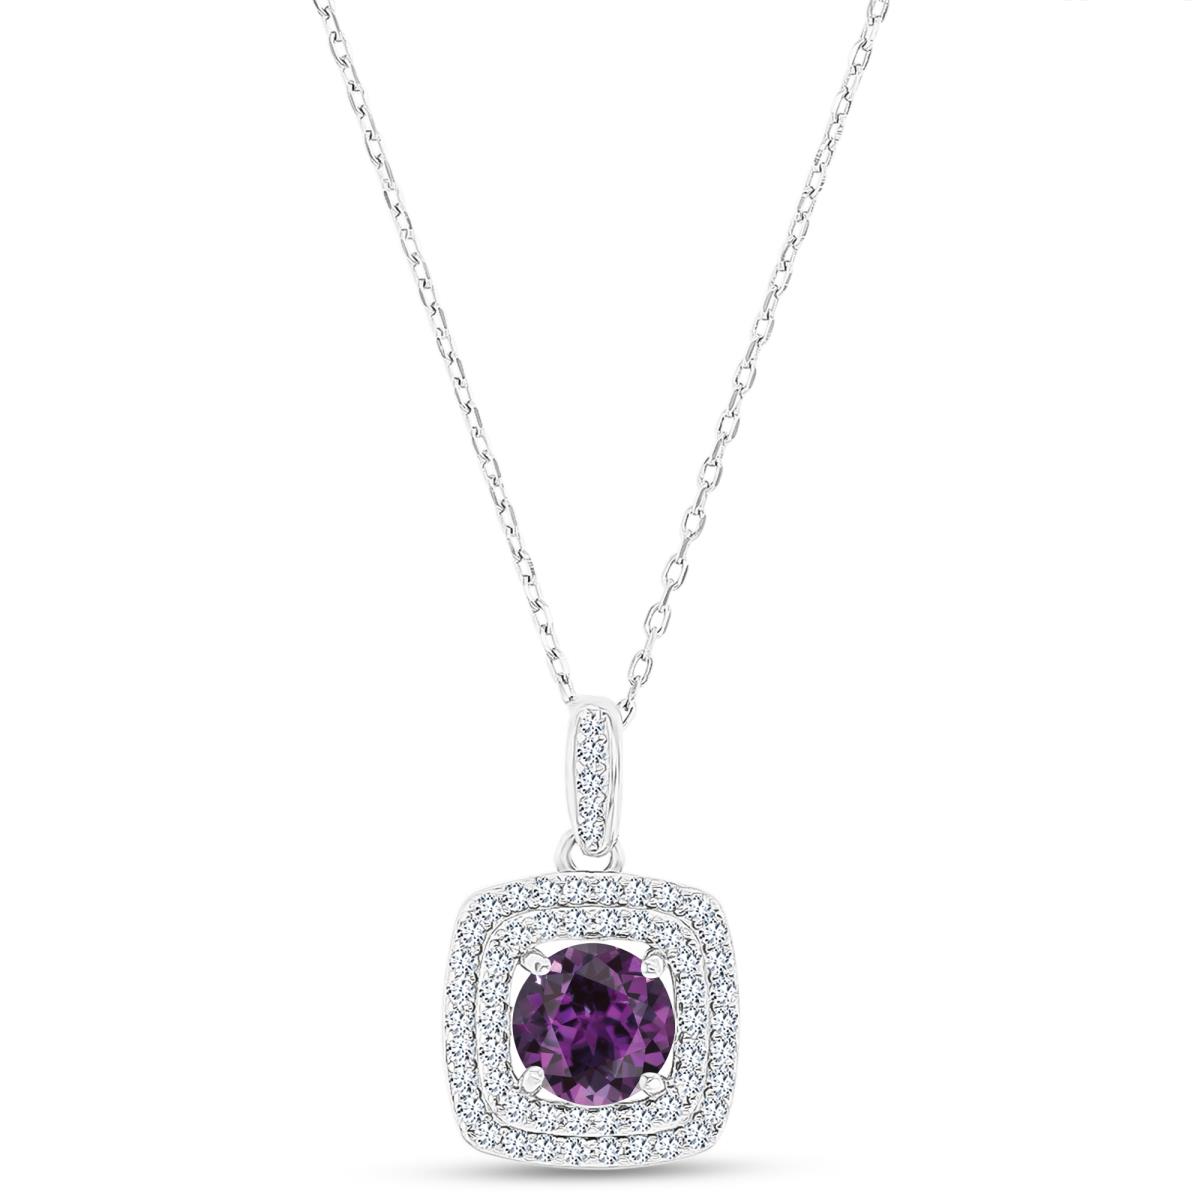 Sterling Silver Rhodium 7mm RD Cr Alexandrite/ Cr White Sapphire Cushion Double Halo 16"+2" Necklace